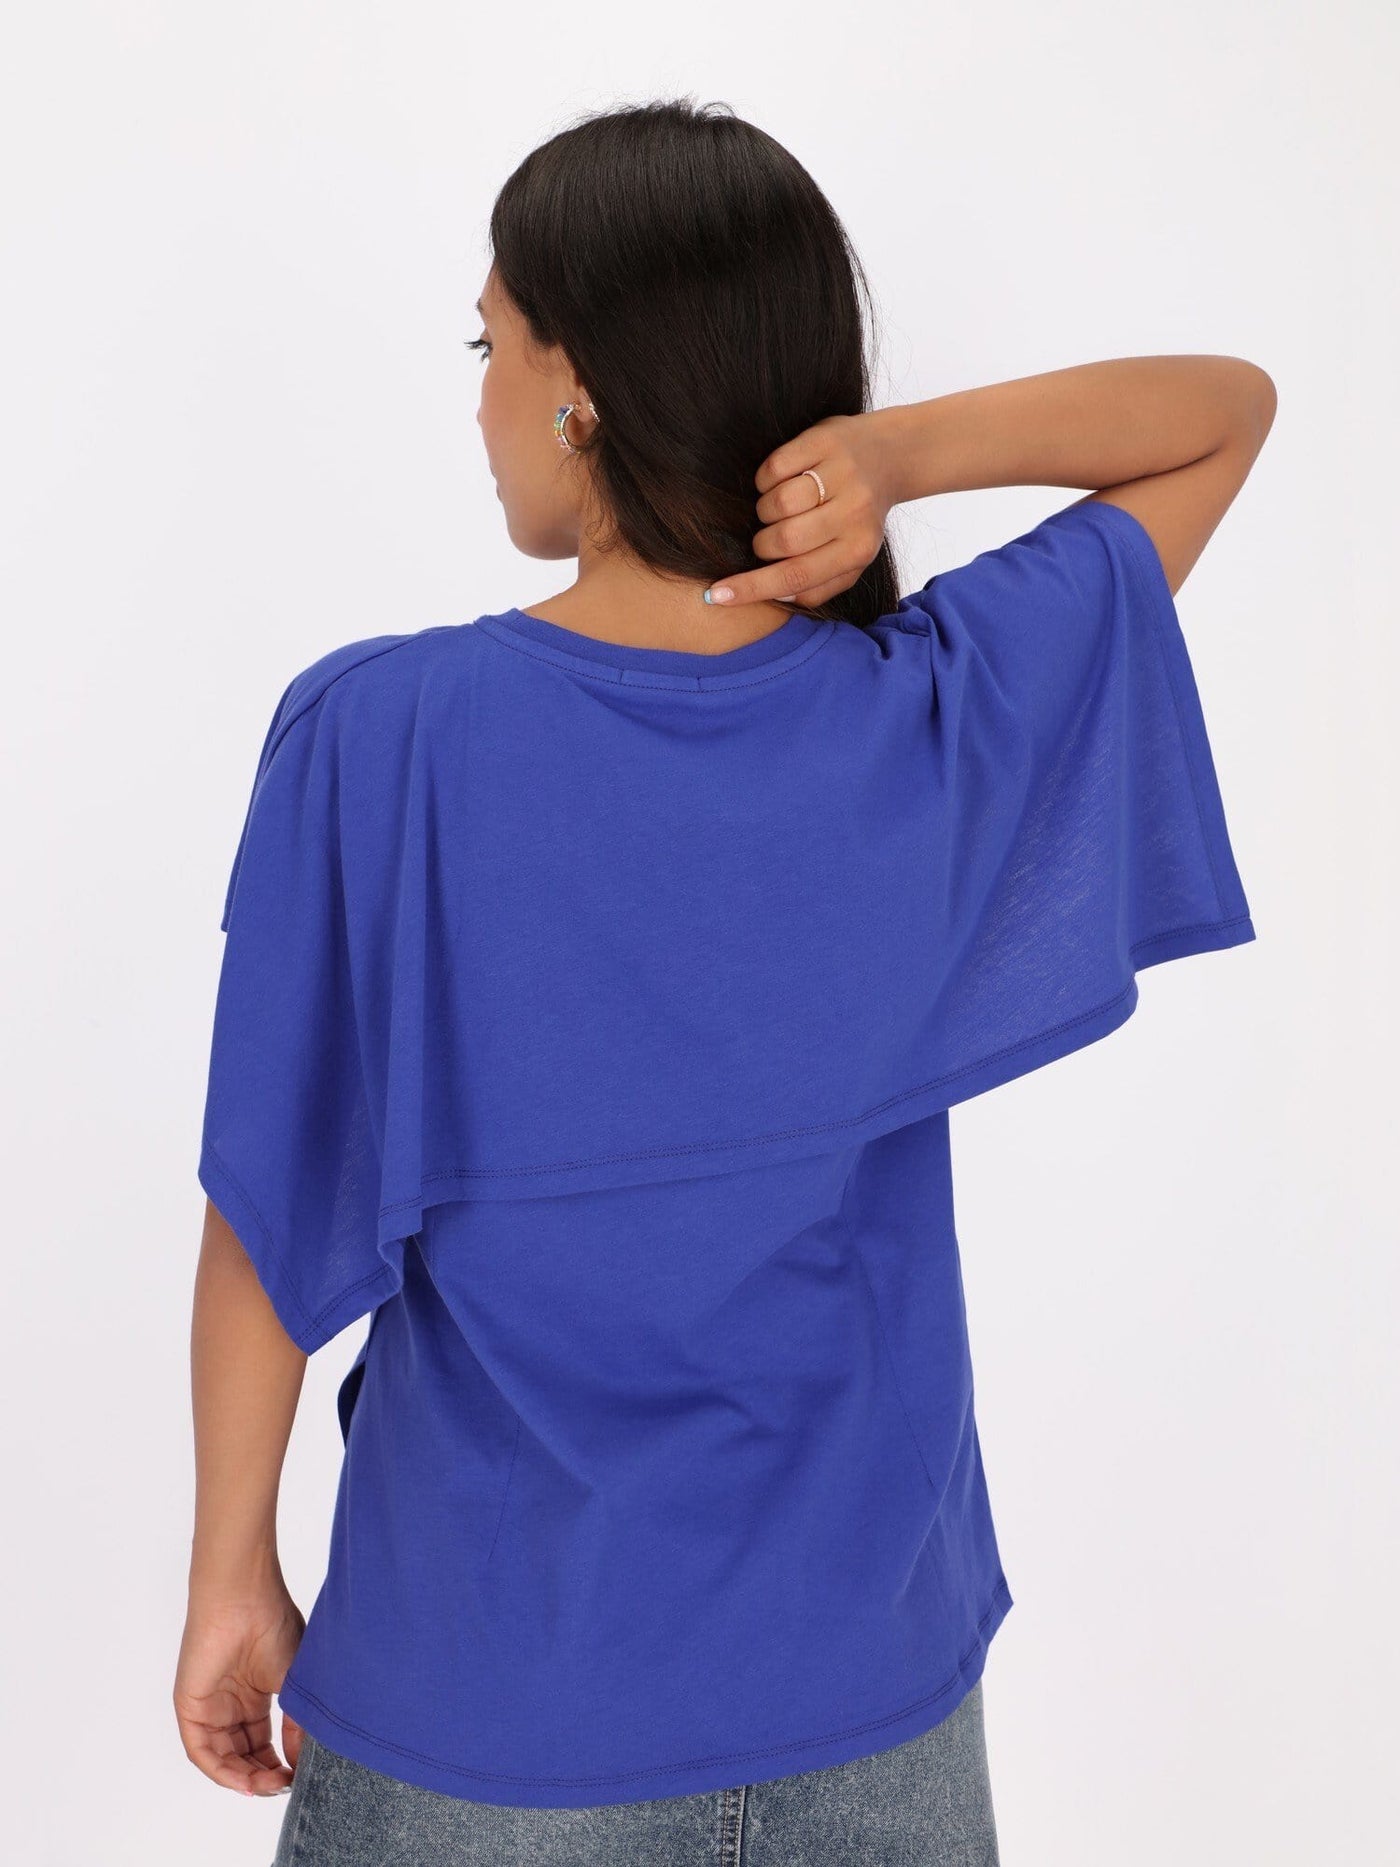 OR Tops & Blouses Cape Sleeve T-shirt